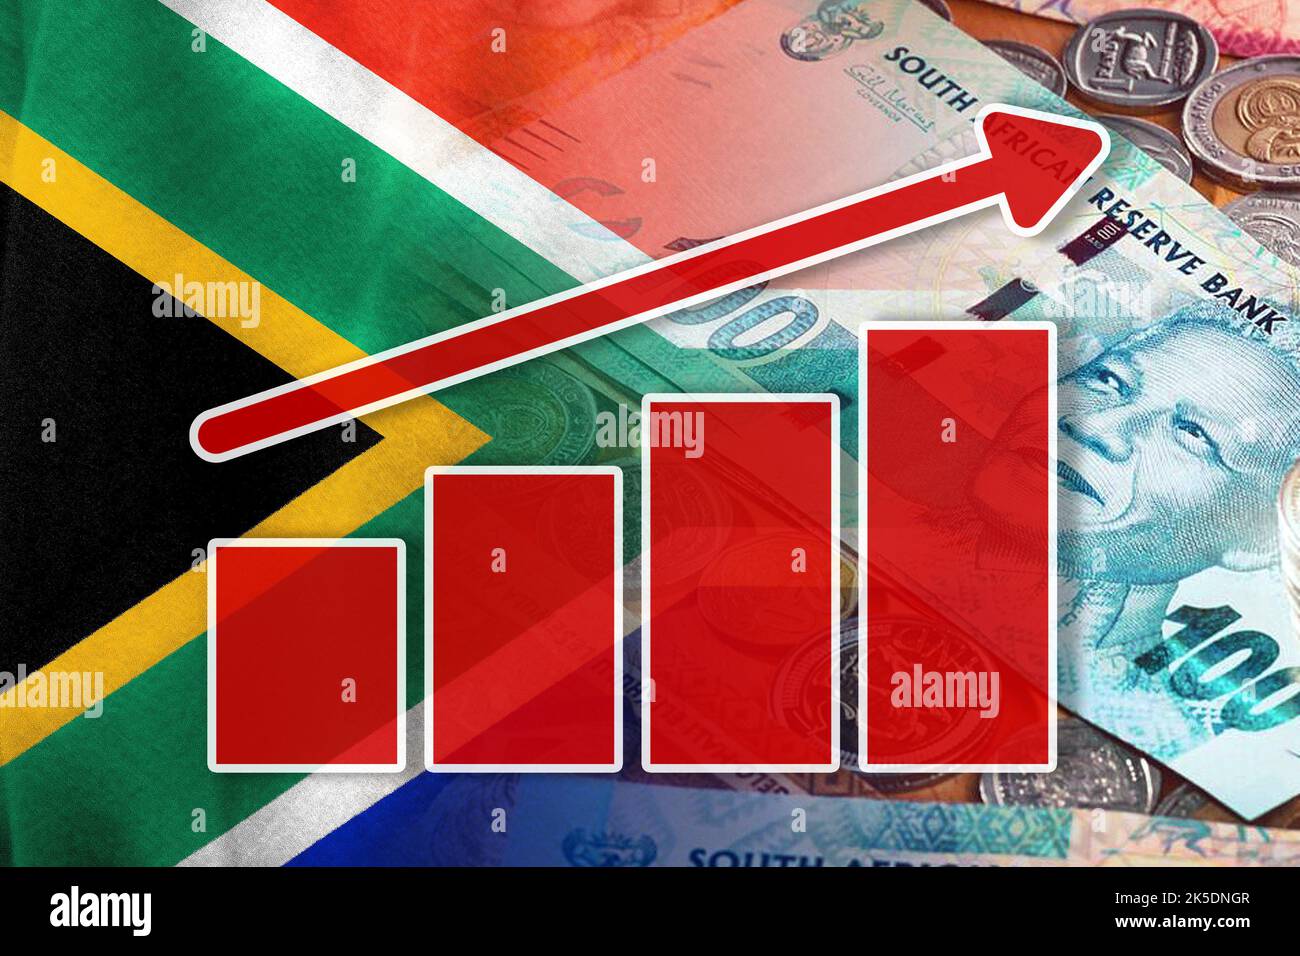 Economy Chart: Upward Arrow, South African Flag and South African Rand Cash Notes and Coins Stock Photo